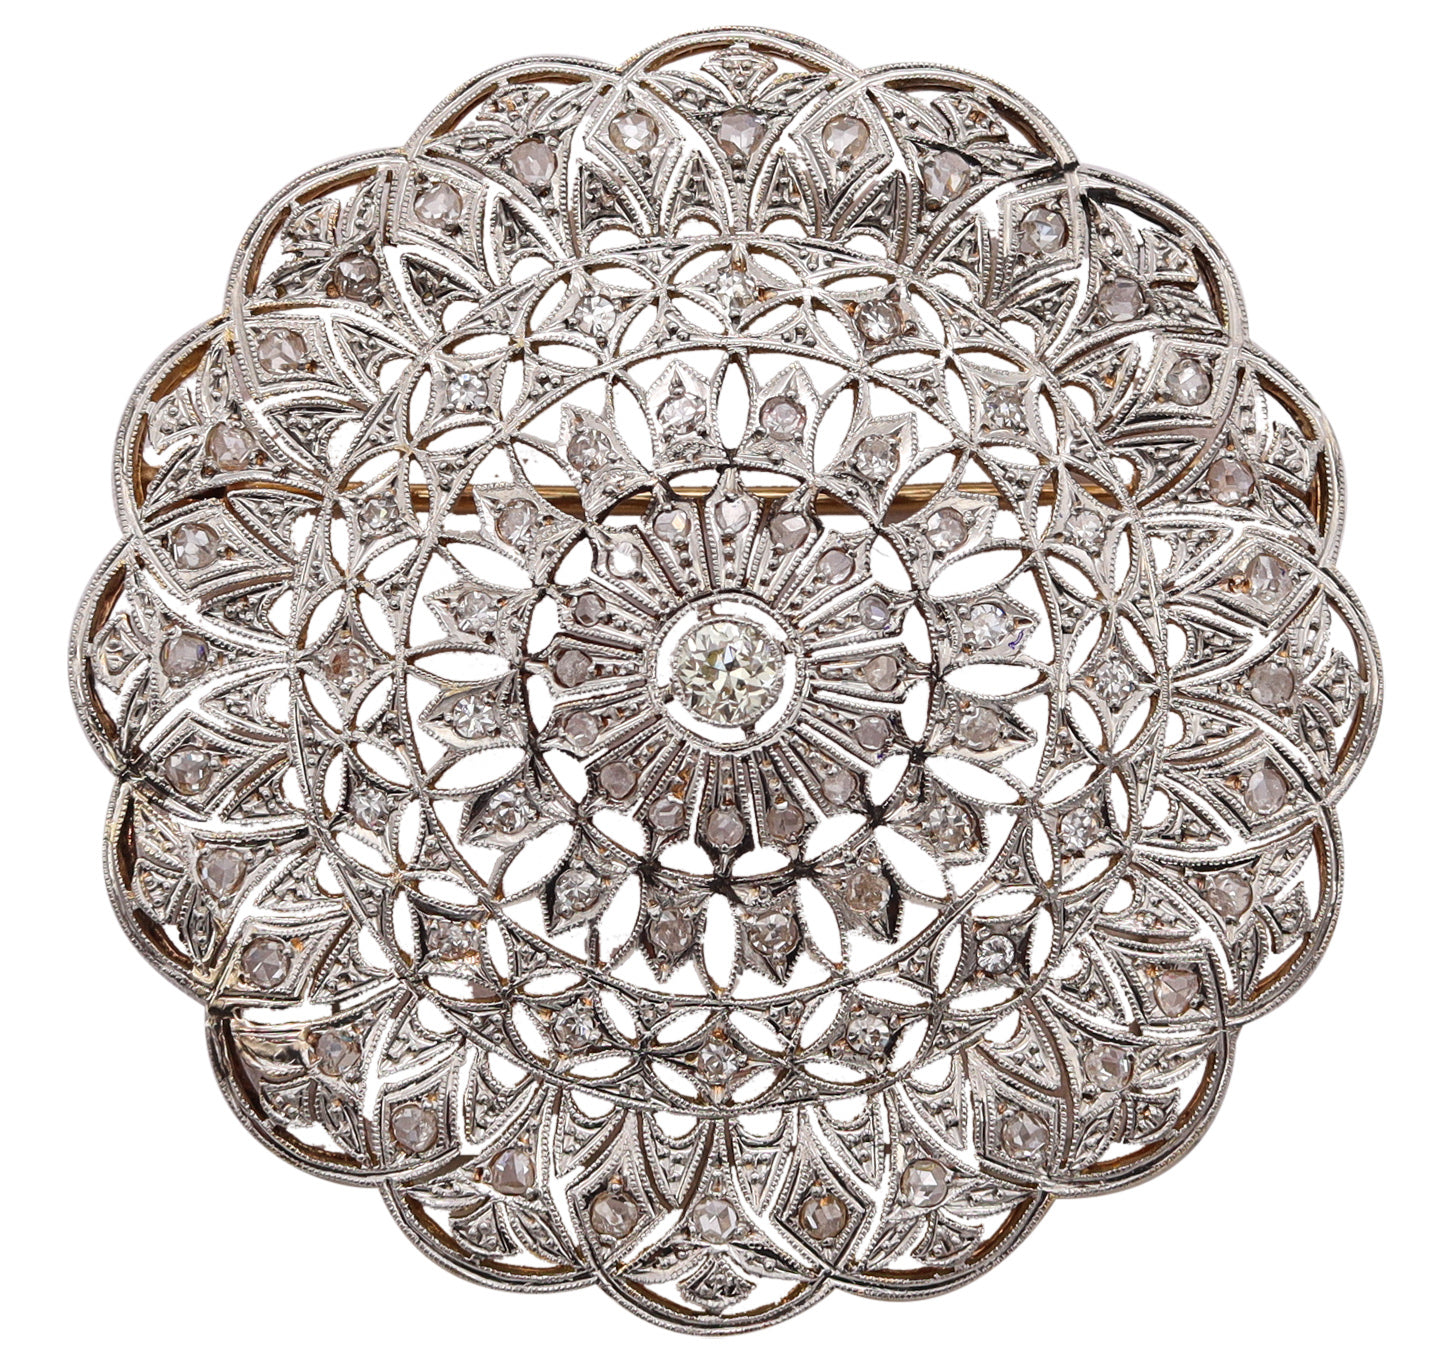 *Edwardian 1910 Rosette Pendant Brooch in 18 kt gold and Platinum with 2.10 Cts in European Diamonds